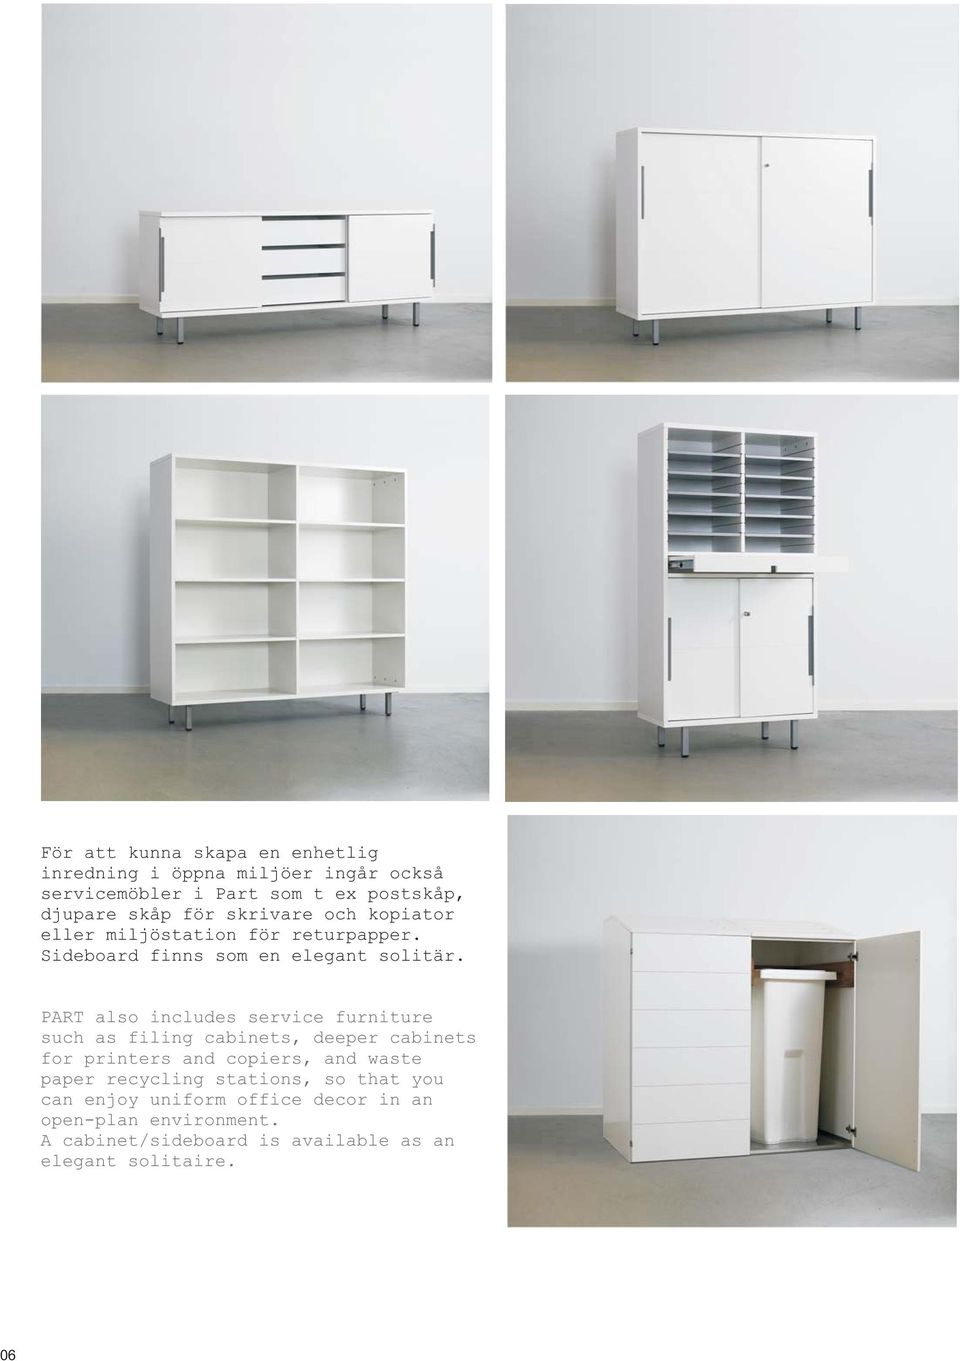 PART also includes service furniture such as filing cabinets, deeper cabinets for printers and copiers, and waste paper